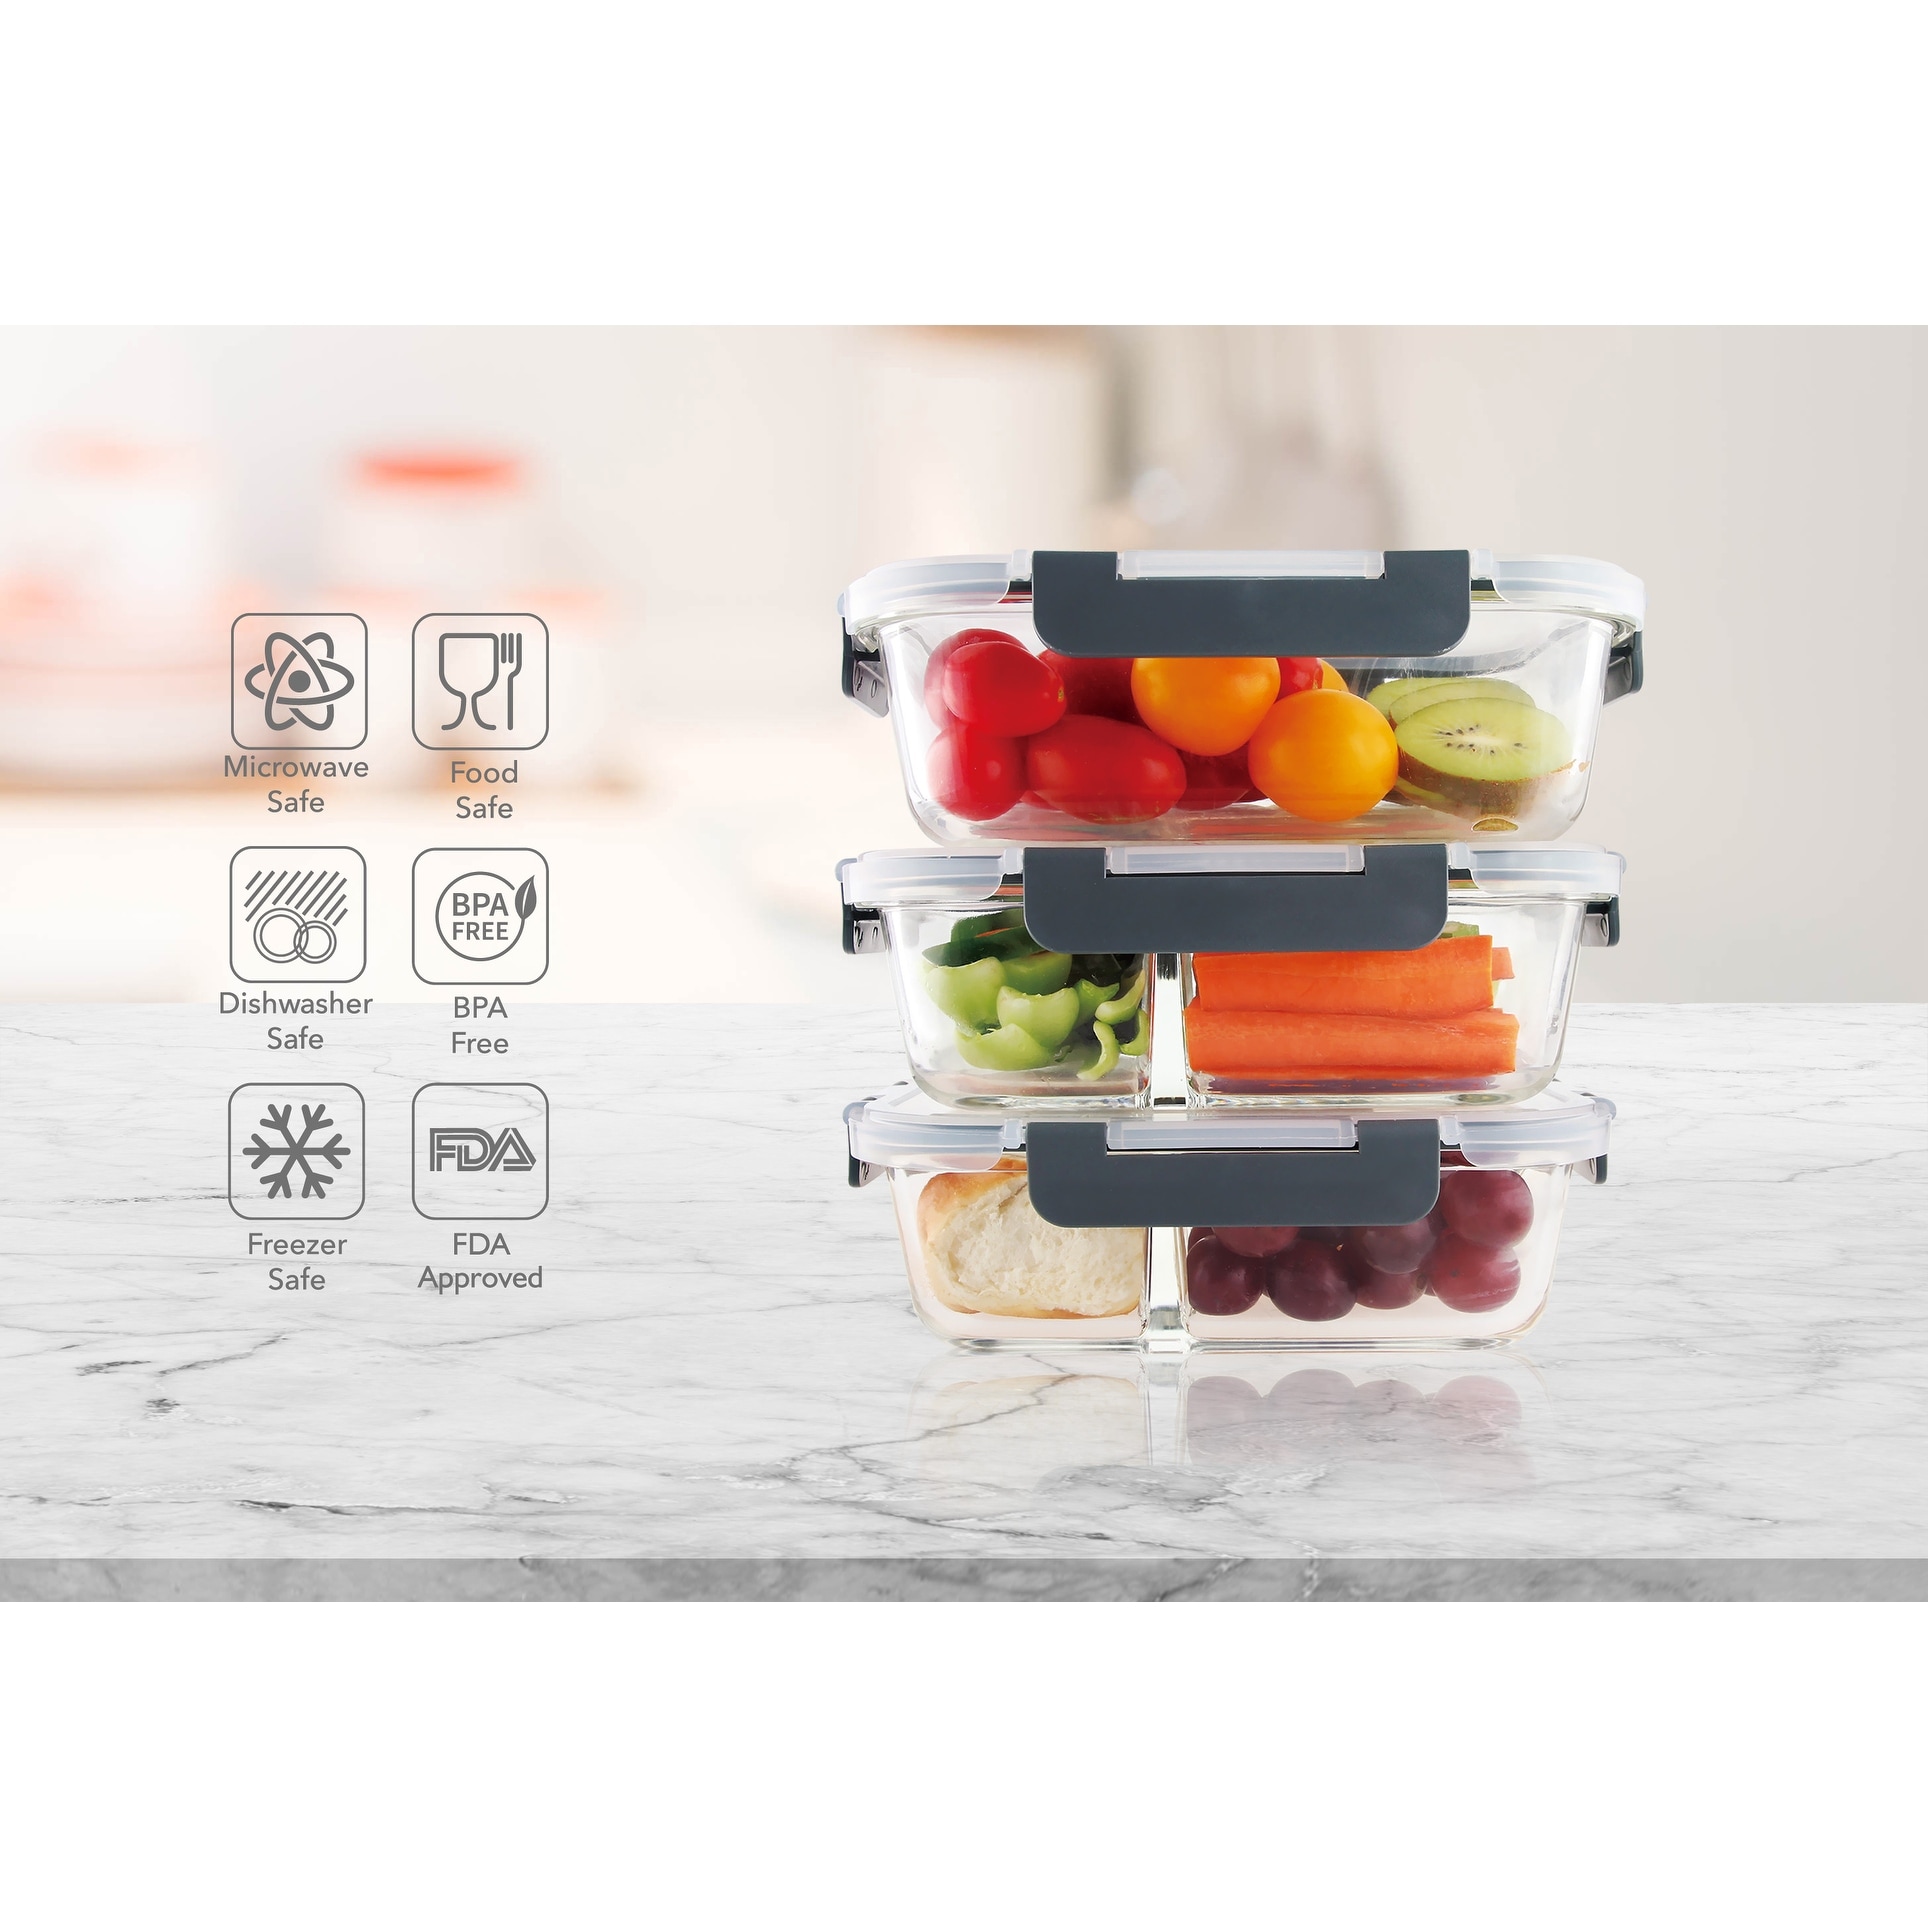 https://ak1.ostkcdn.com/images/products/is/images/direct/e6a7992cf2d07673a87238caa5c4e01e0c3f120a/Prime-Cook-RECTANGULAR-GLASS-FOOD-CONTAINER-WITH-LID-3-Piece-SET.jpg